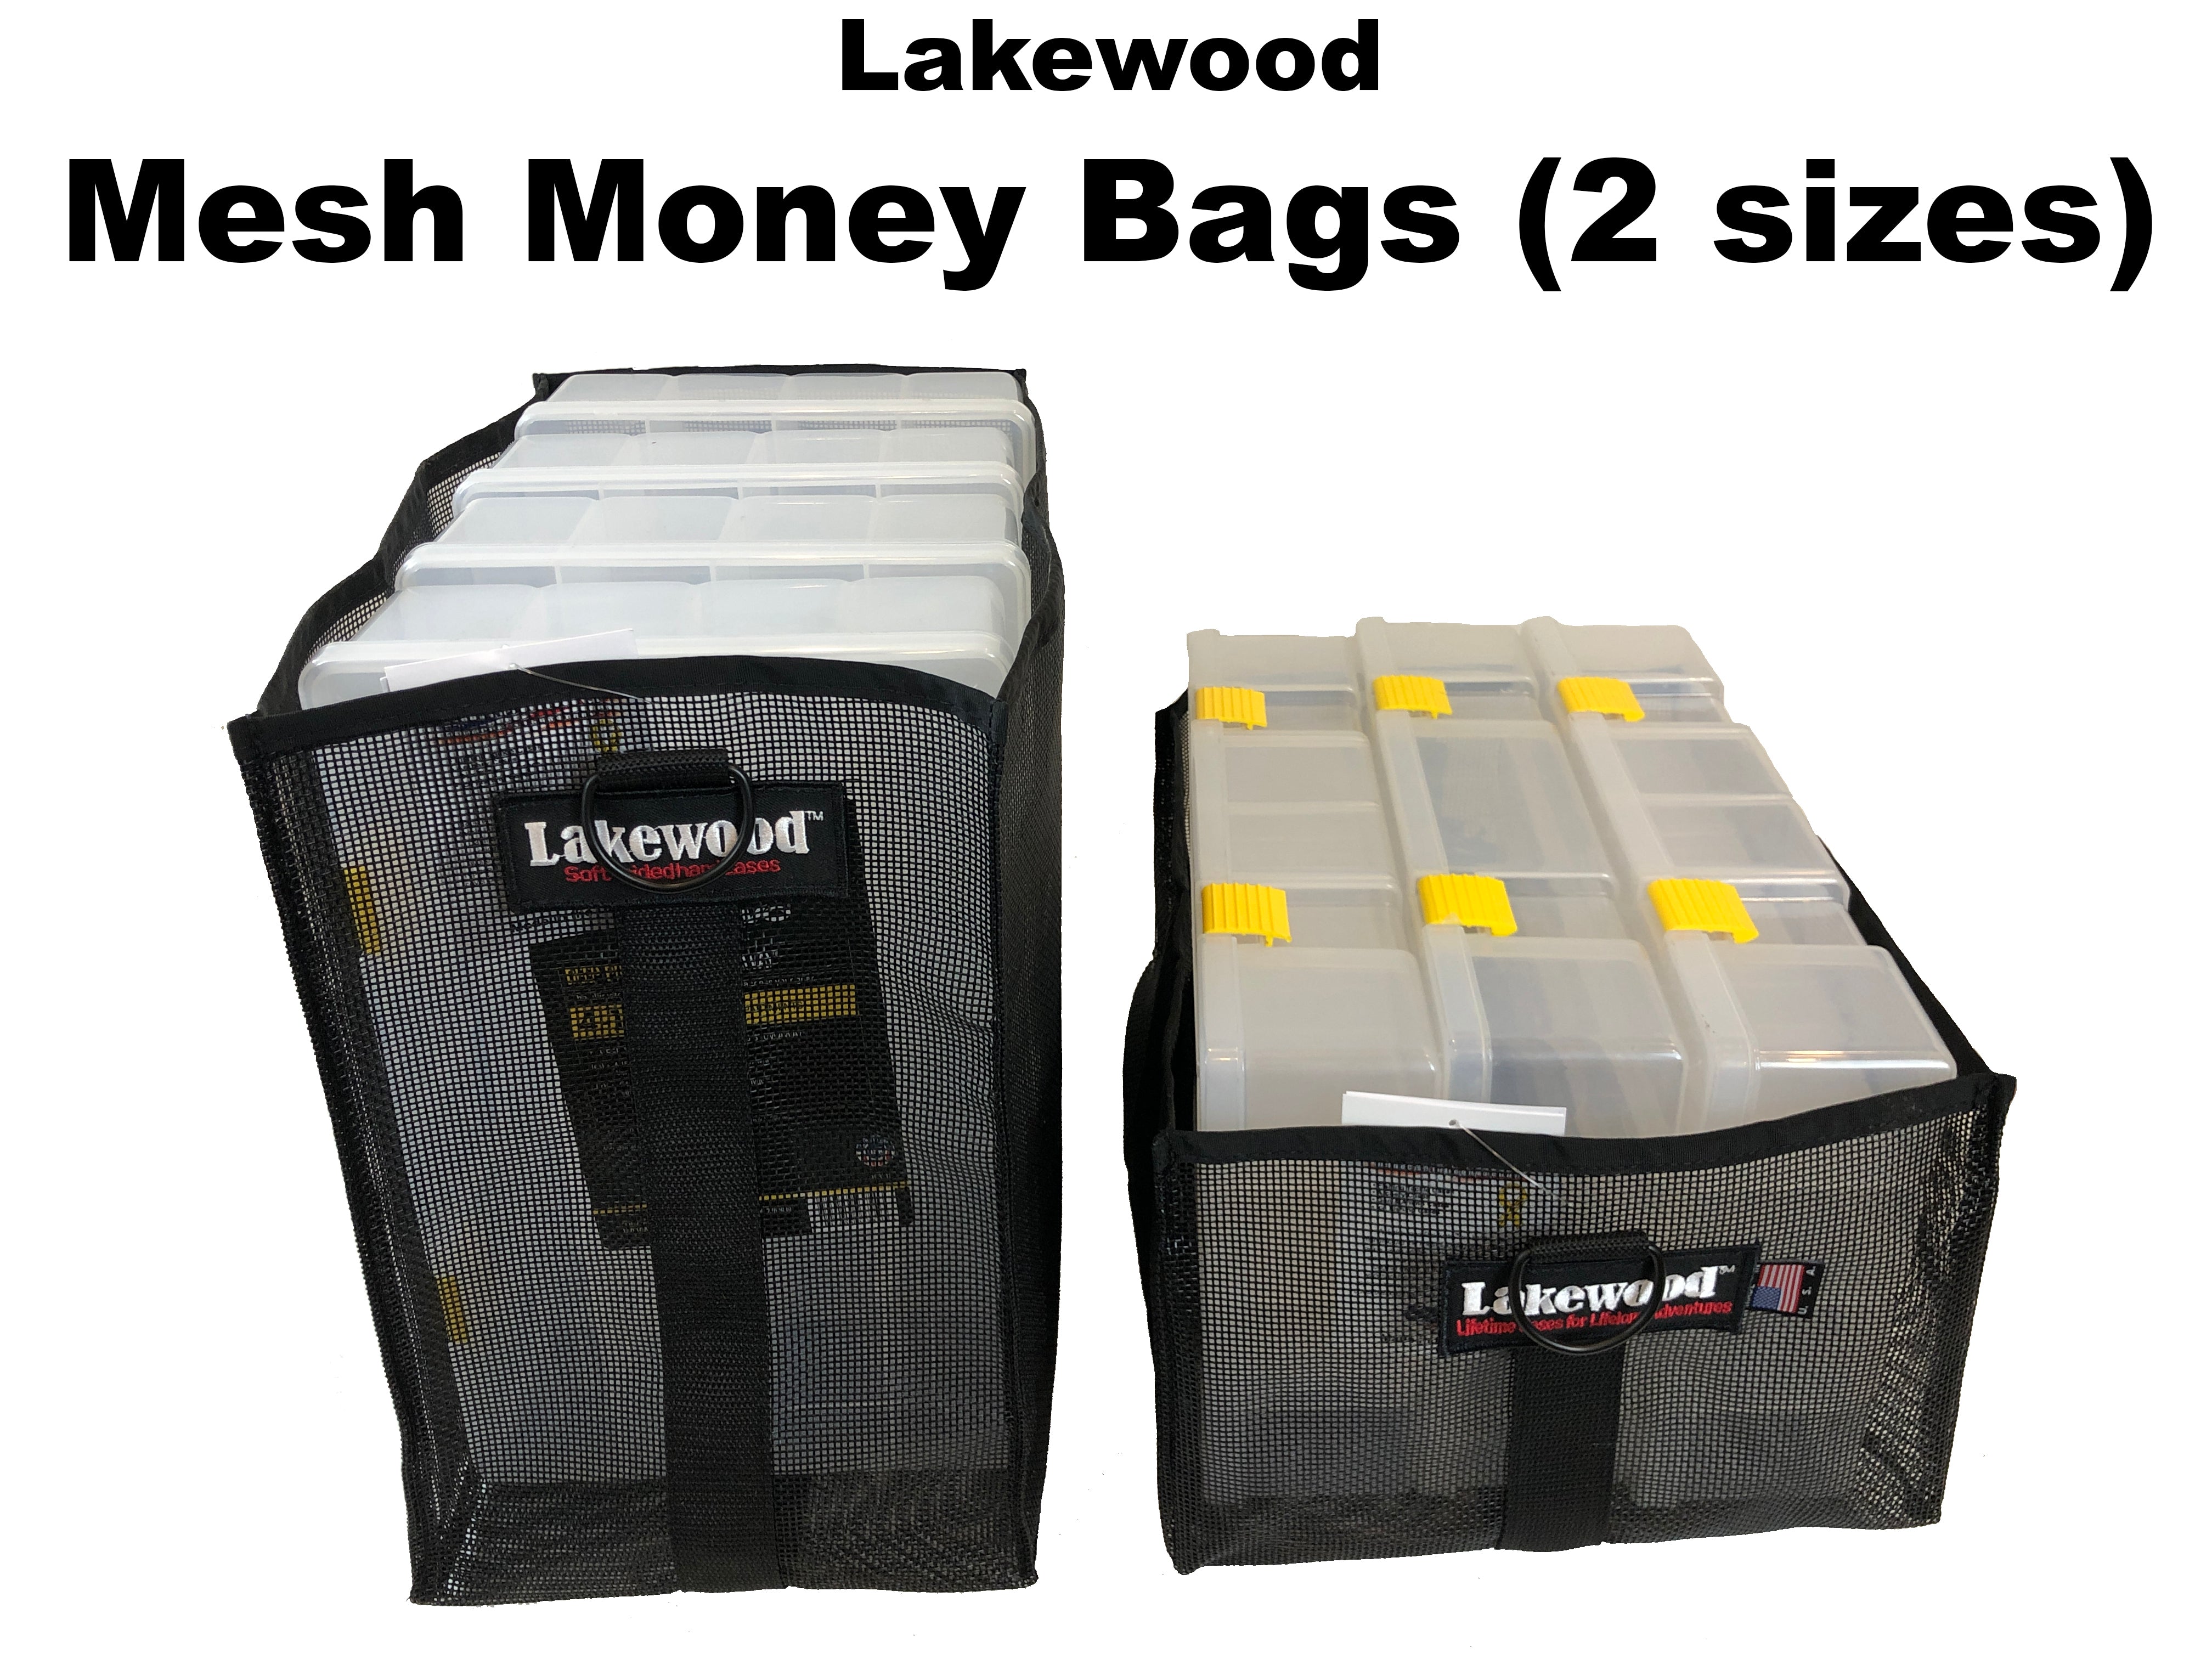 Money Bags - Mesh Bag Storage Solution- 2 Sizes Available